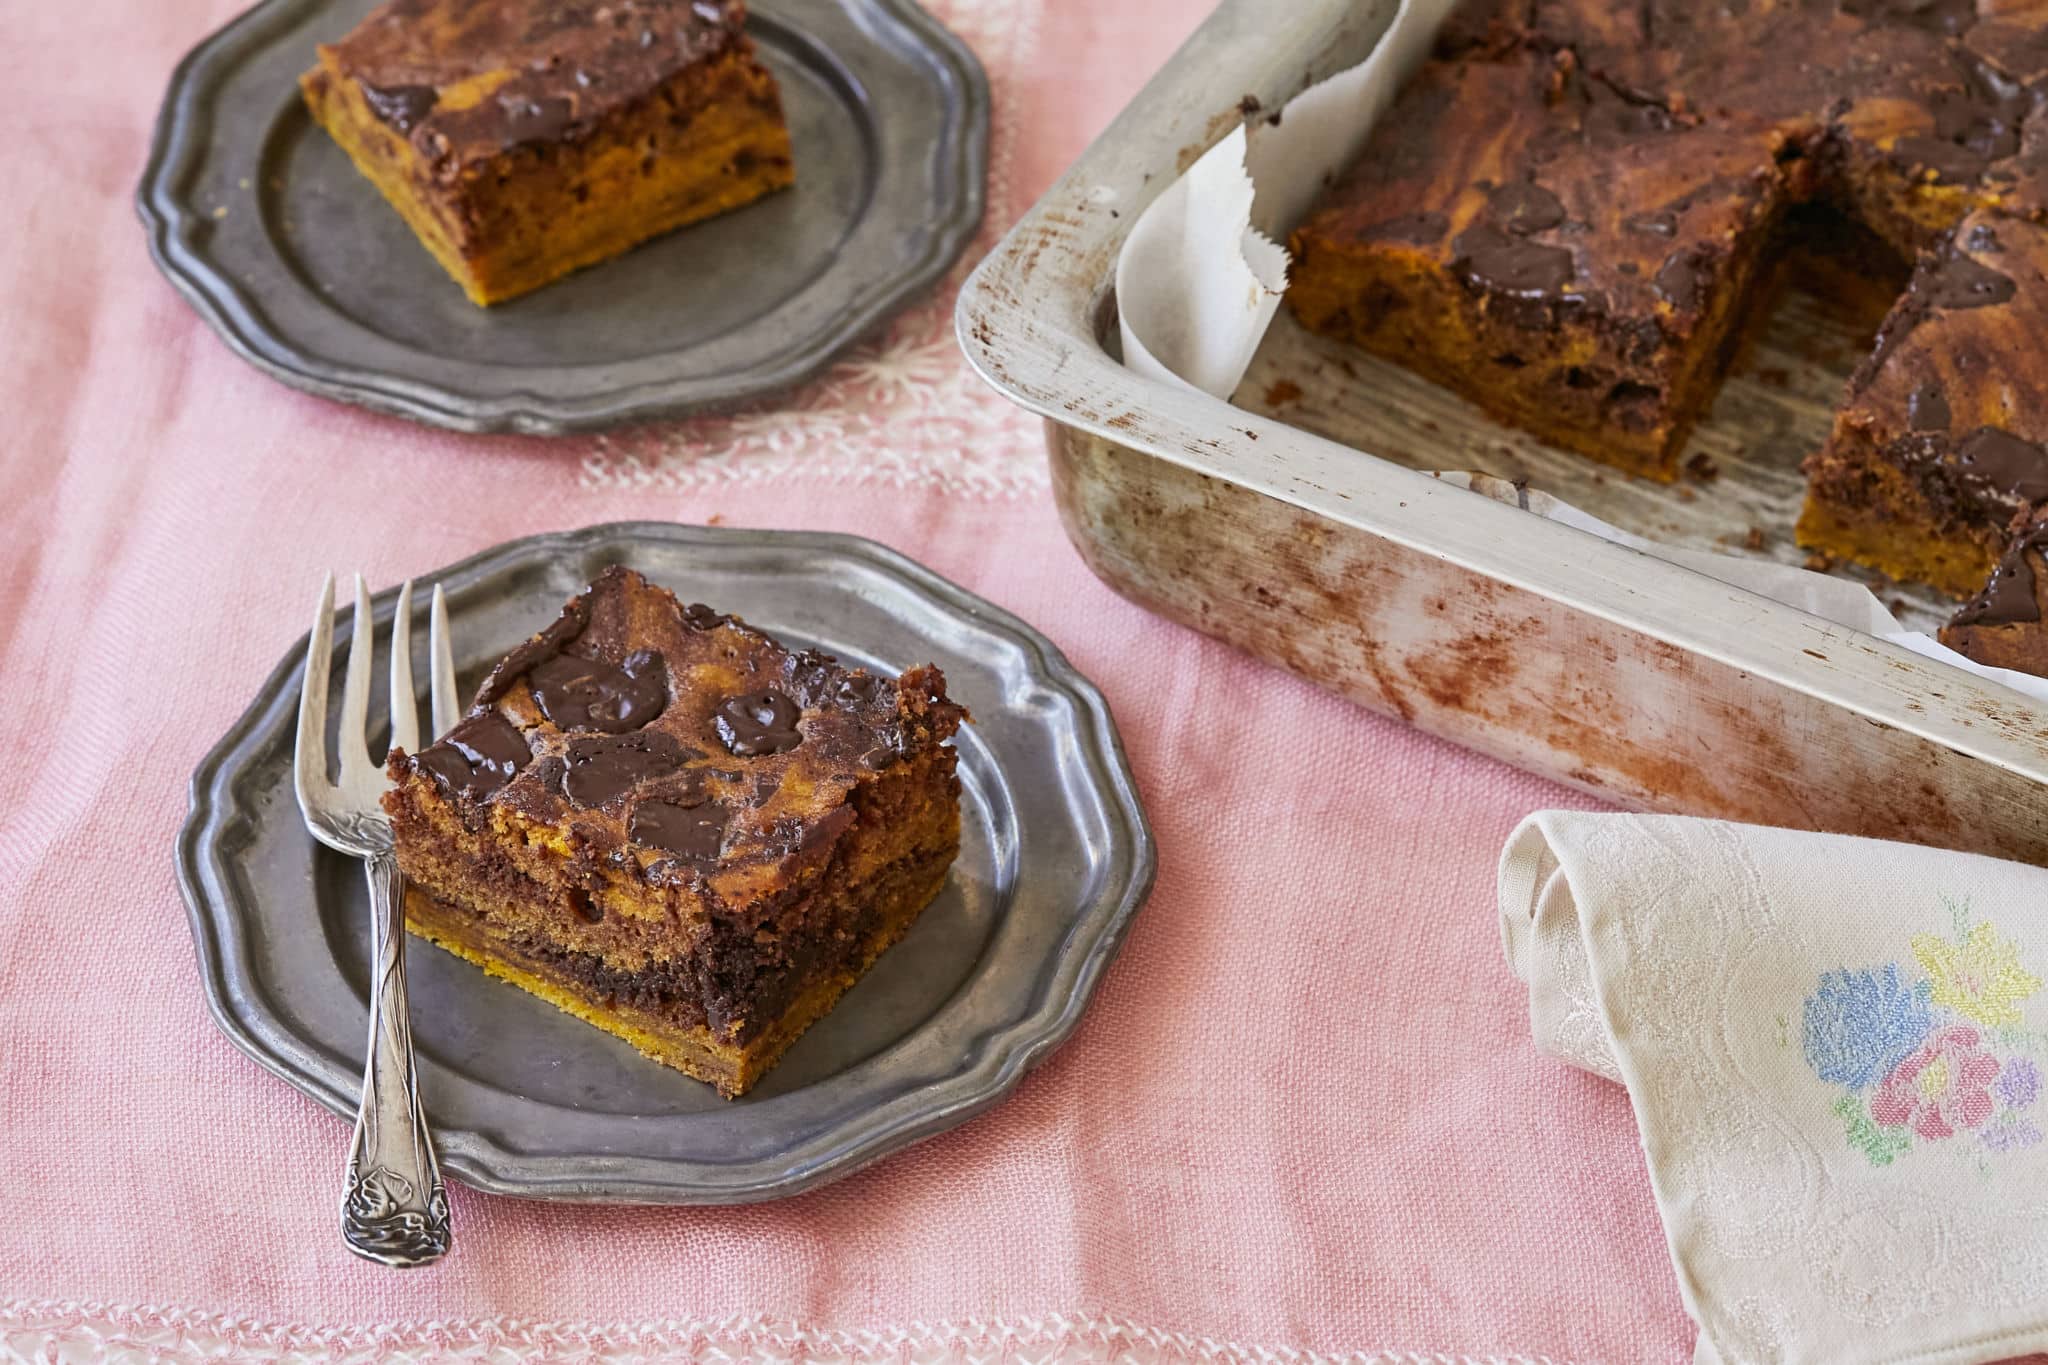 A square slice of homemade pumpkin pie brownies is cut and served on a dish next to the entire batch.